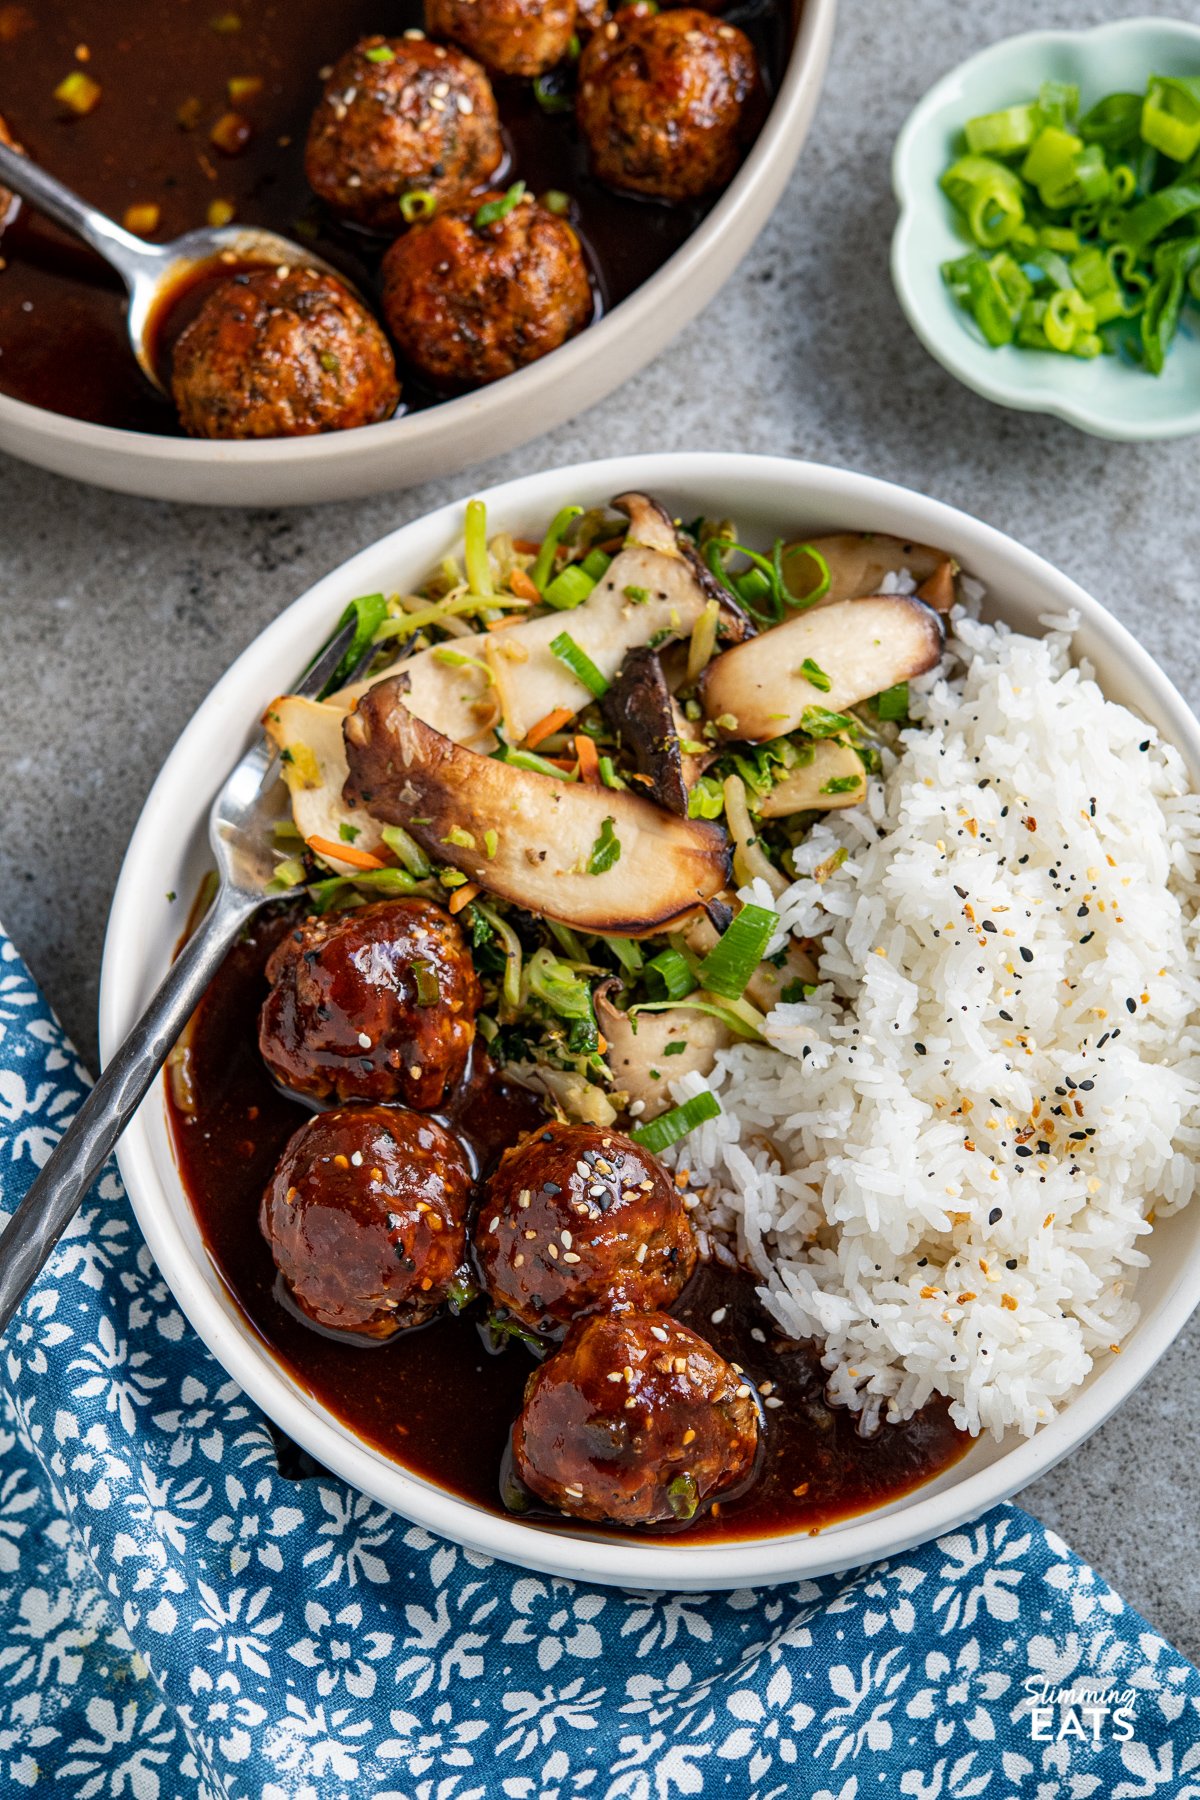 serving of Chicken Meatballs in white bowl with jasmine rice and stir fried vegetables, bowl of meatballs and small blue bowl of chopped spring onions in background